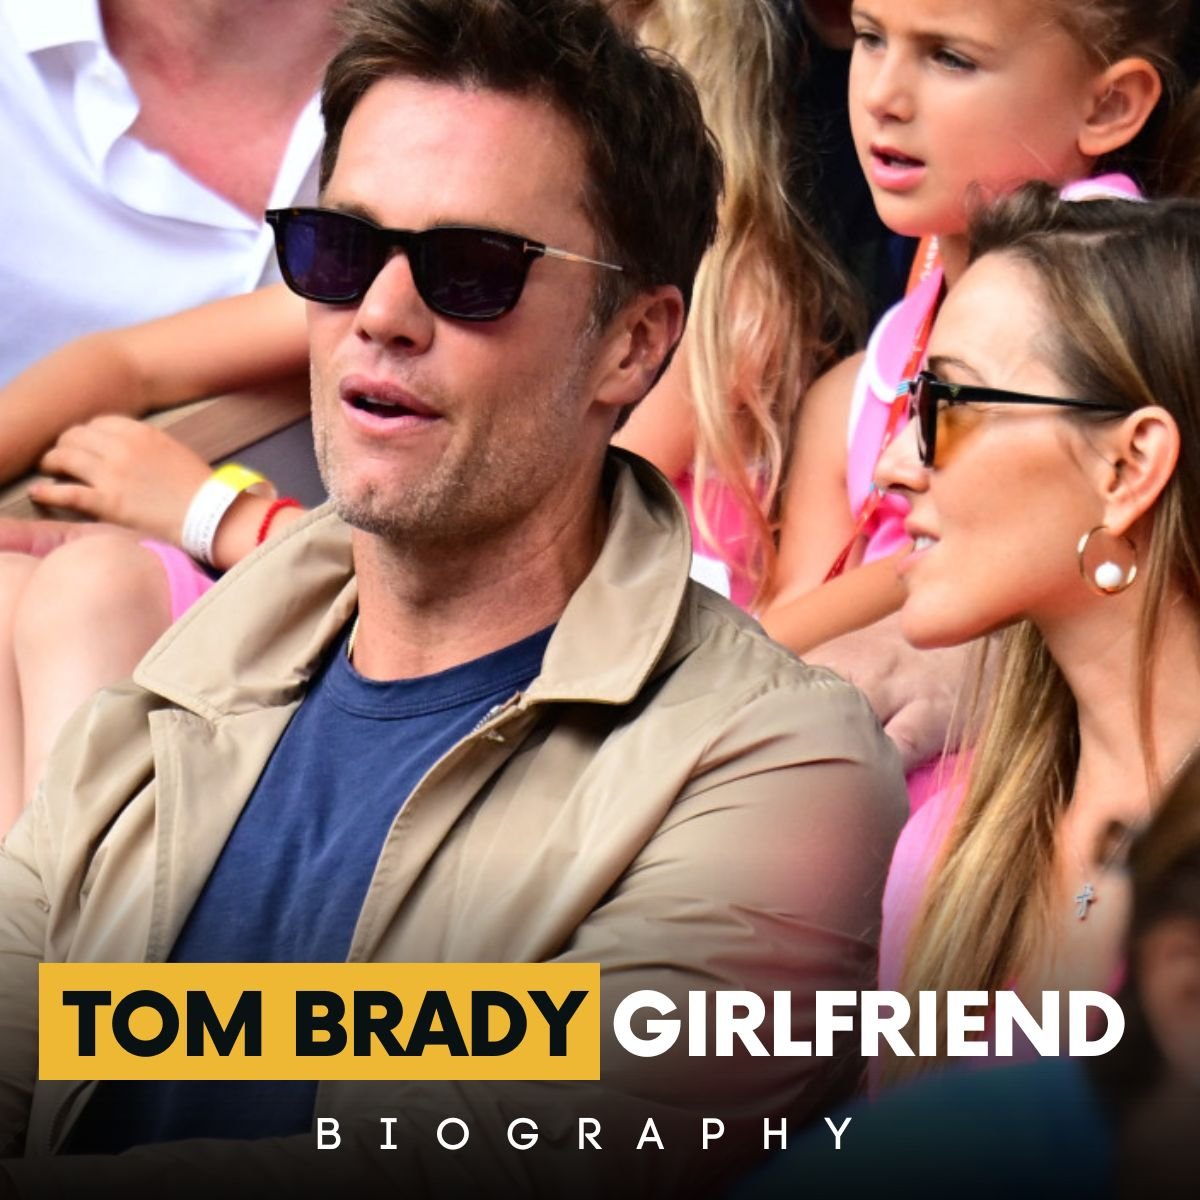 Is Tom Brady Dating? Who Is The ‘Lucky’ Girl – Irina?